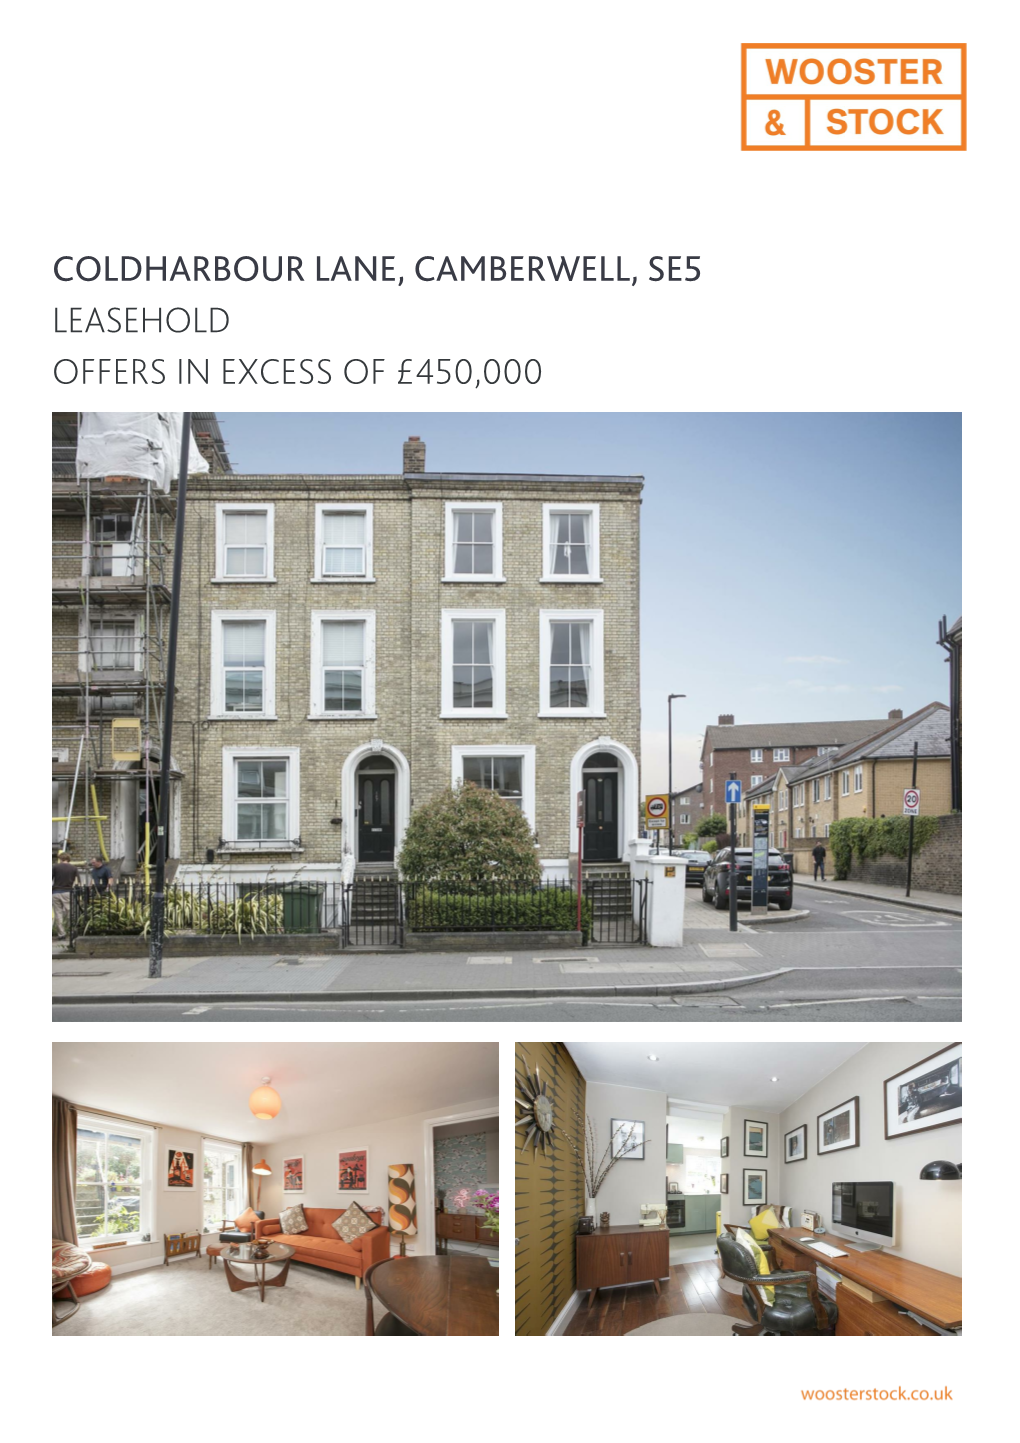 Coldharbour Lane, Camberwell, Se5 Leasehold Offers in Excess of £450,000 Spec Features